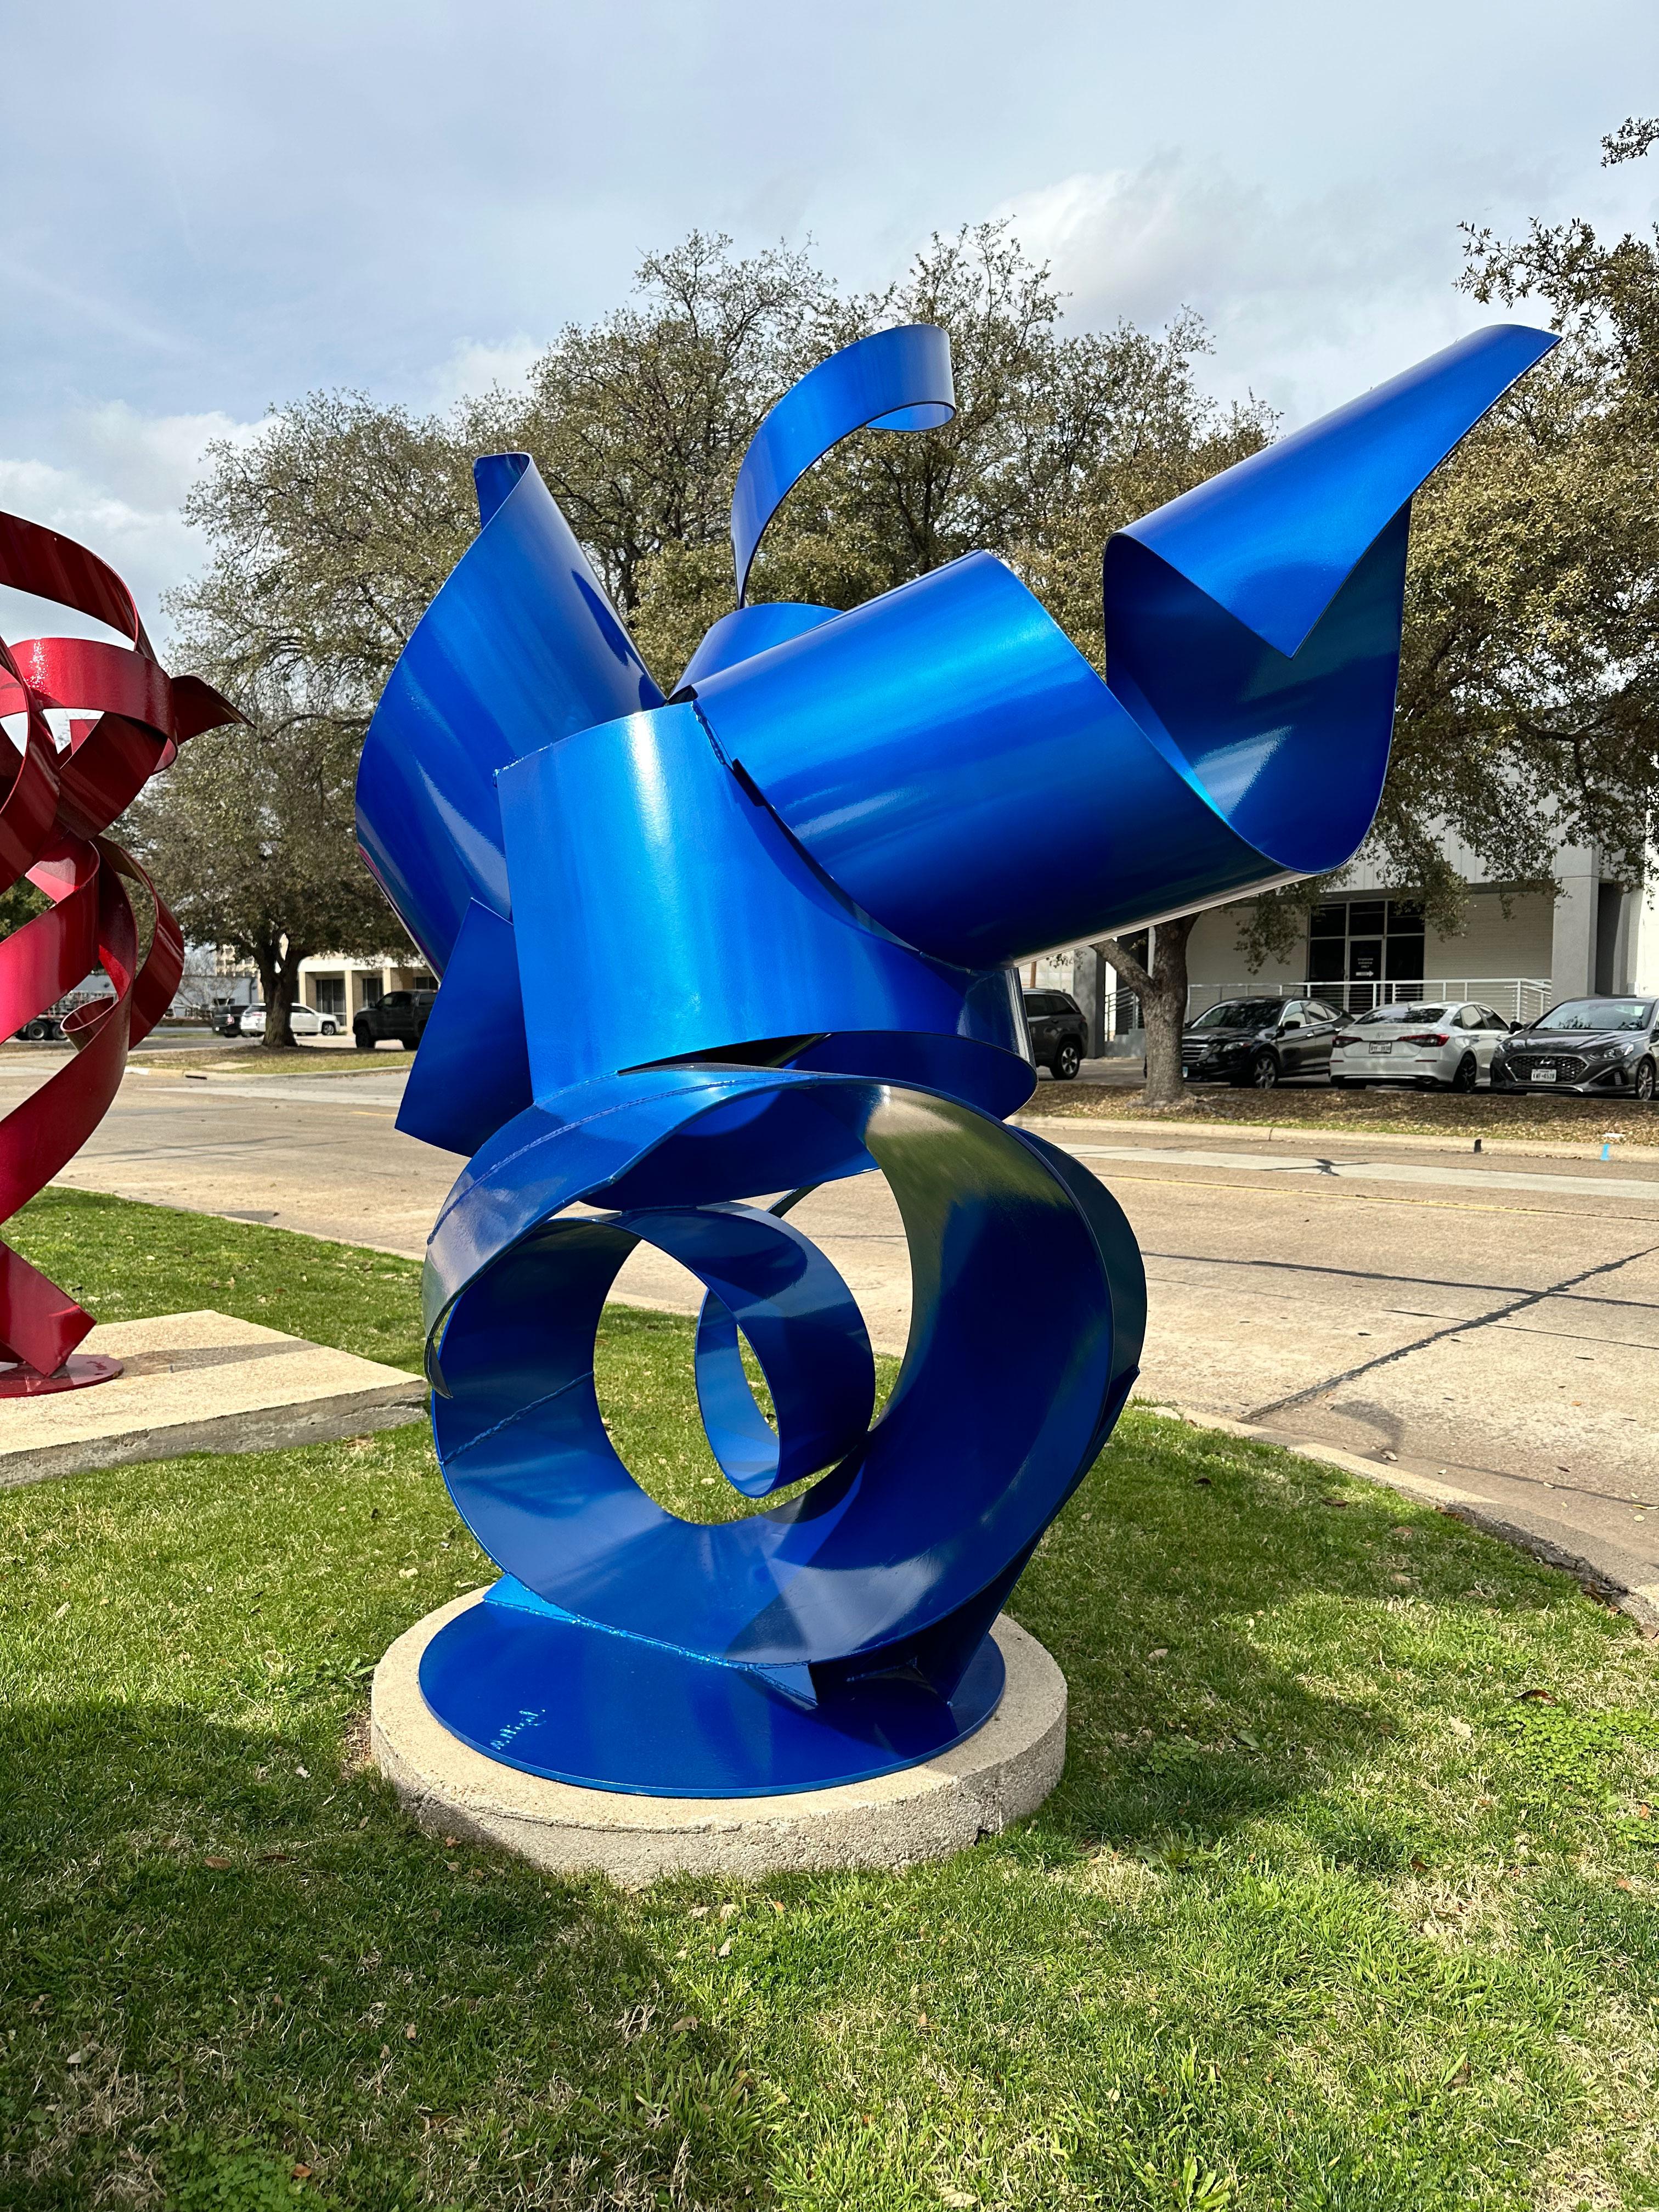 Nic Noblique is a Texas-based sculptor whose preferred medium is steel. Noblique has, in a relatively short amount of time, become one of the foremost abstract sculptors in the United States. This piece, entitled "Look Inside My Twisted Blue Mind",